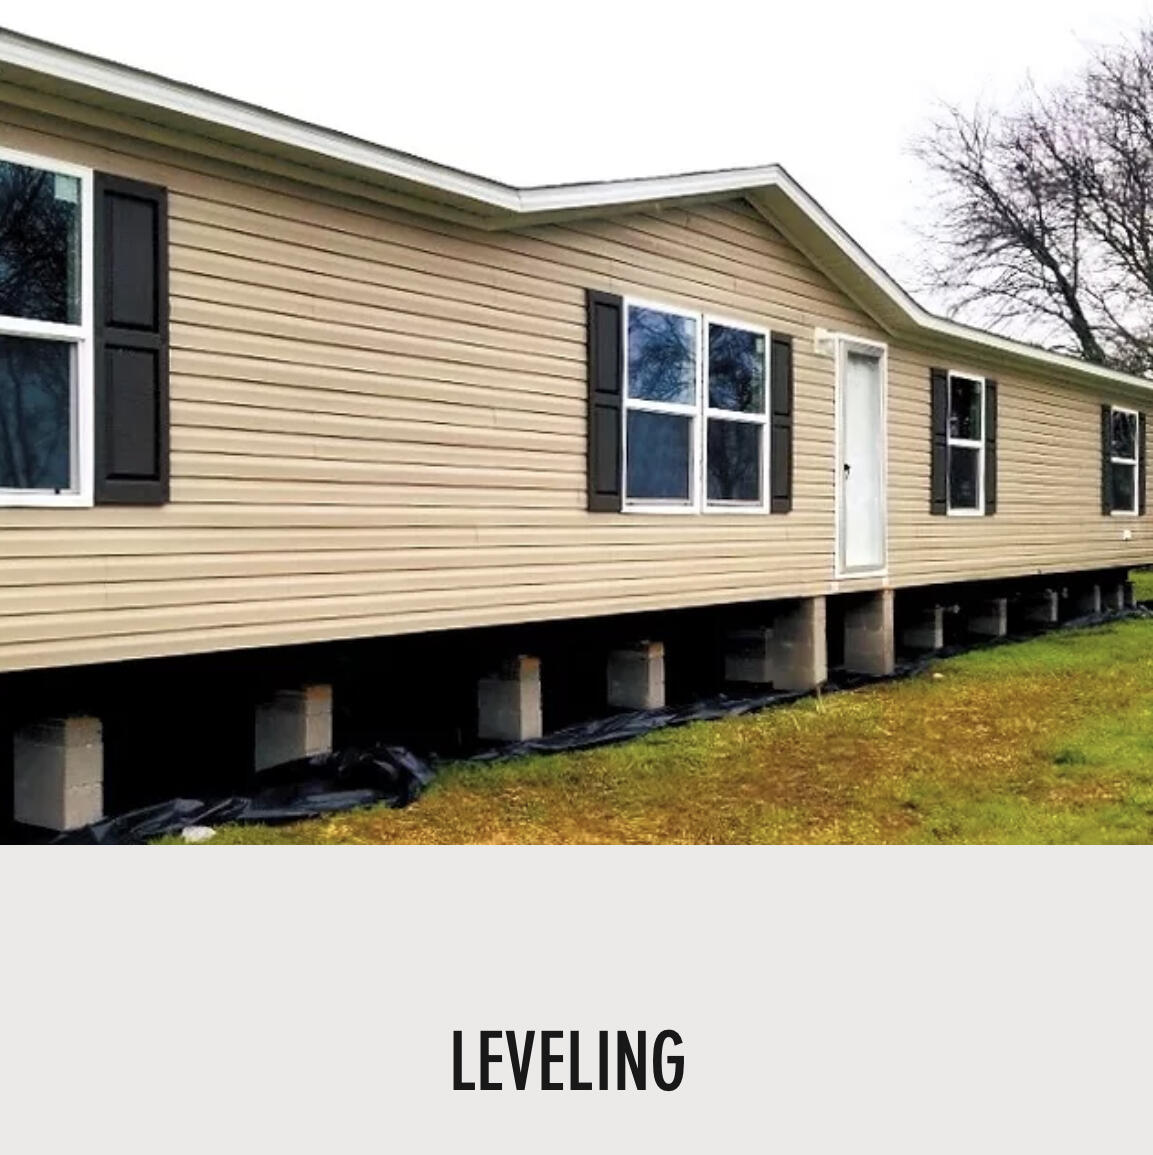 RJ Leveling & Mobile Home Services 12201 Shine Ave, Rhome Texas 76078